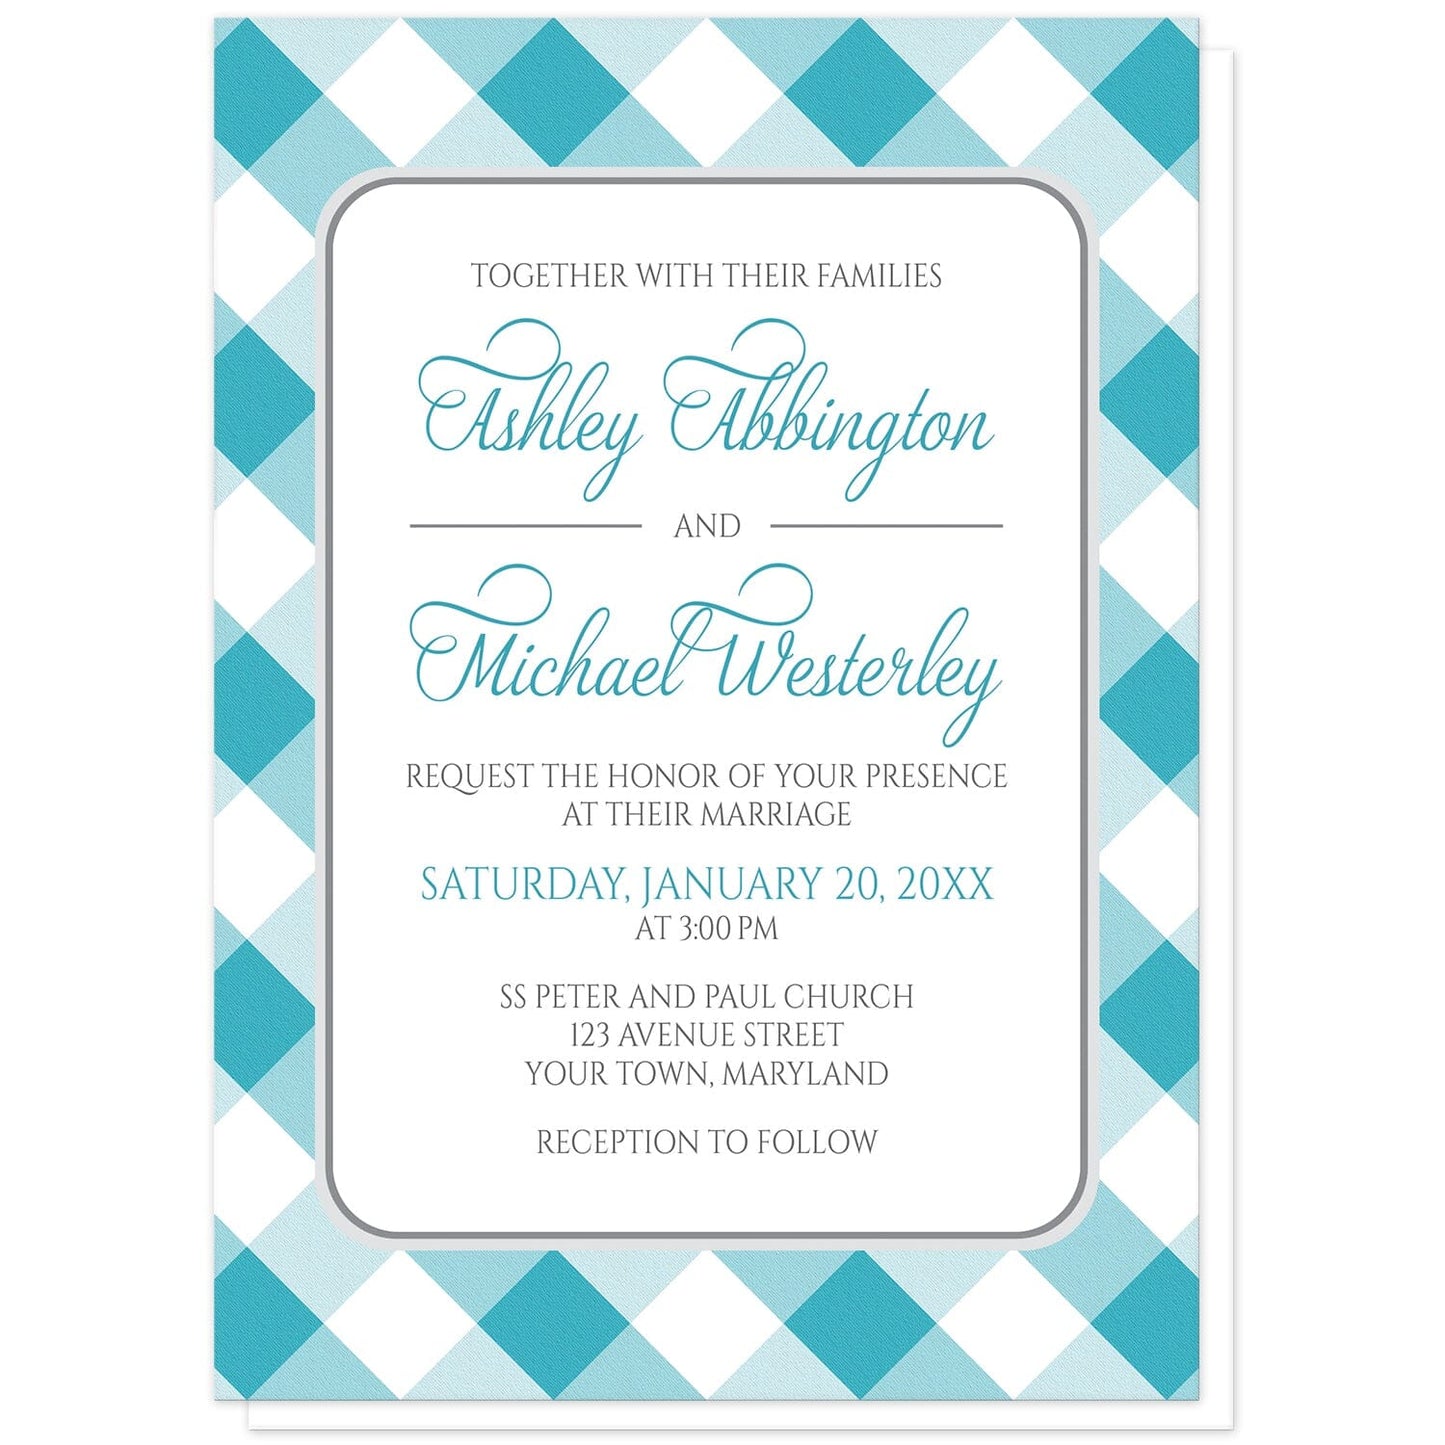 Turquoise Gingham Wedding Invitations at Artistically Invited. Turquoise gingham wedding invitations with your personalized wedding ceremony details custom printed in turquoise and gray inside a white rectangular area outlined in gray. The background design is a diagonal turquoise and white gingham pattern. 